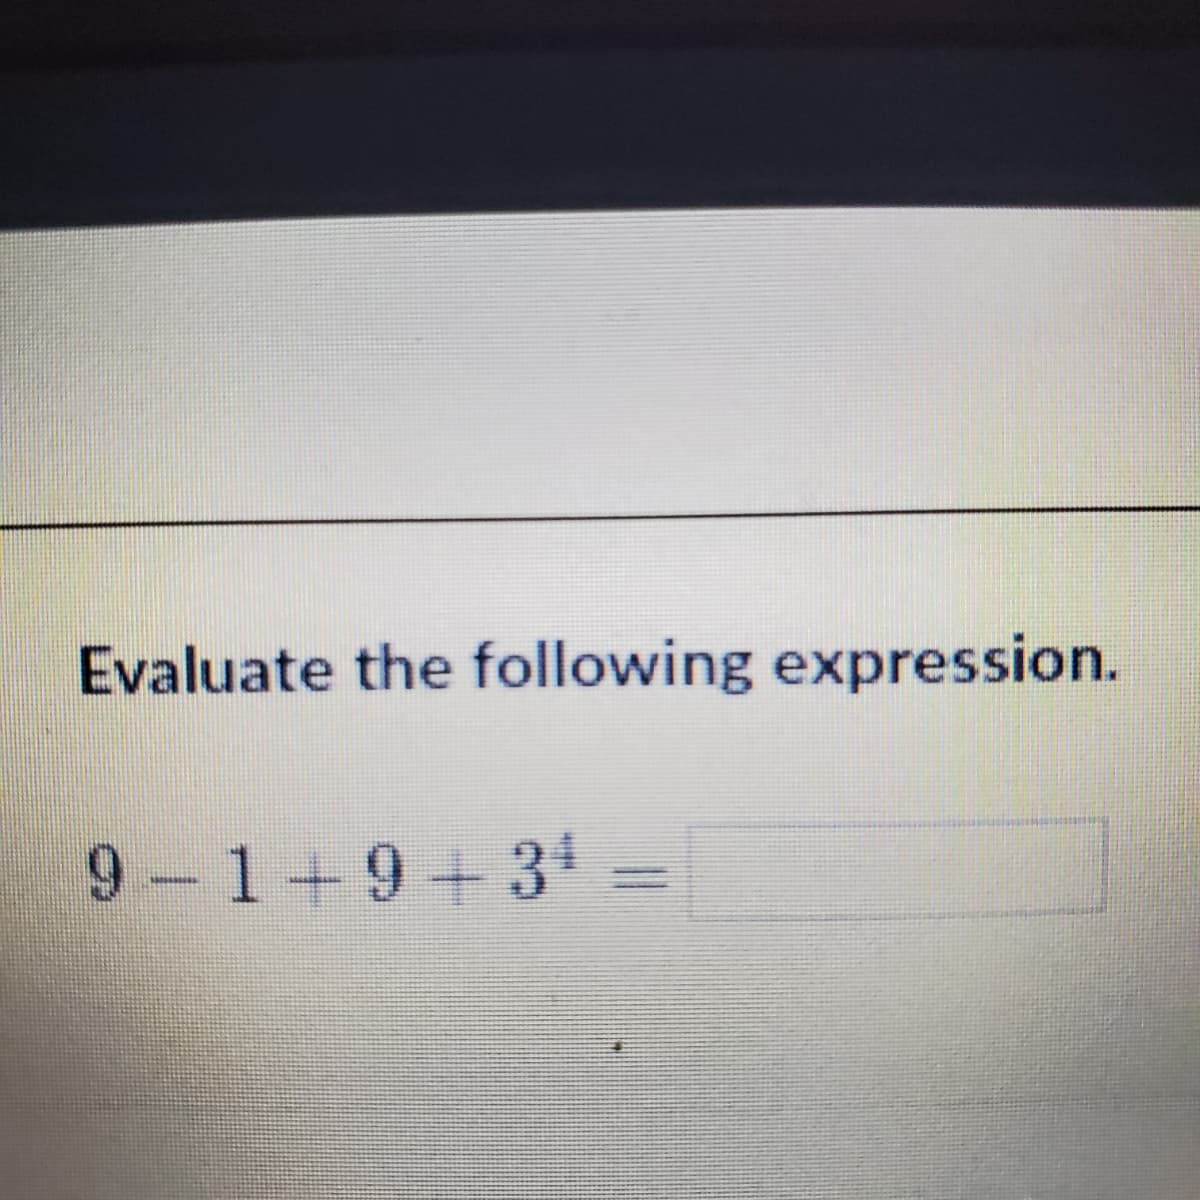 Evaluate the following expression.
9 -1+9+34
